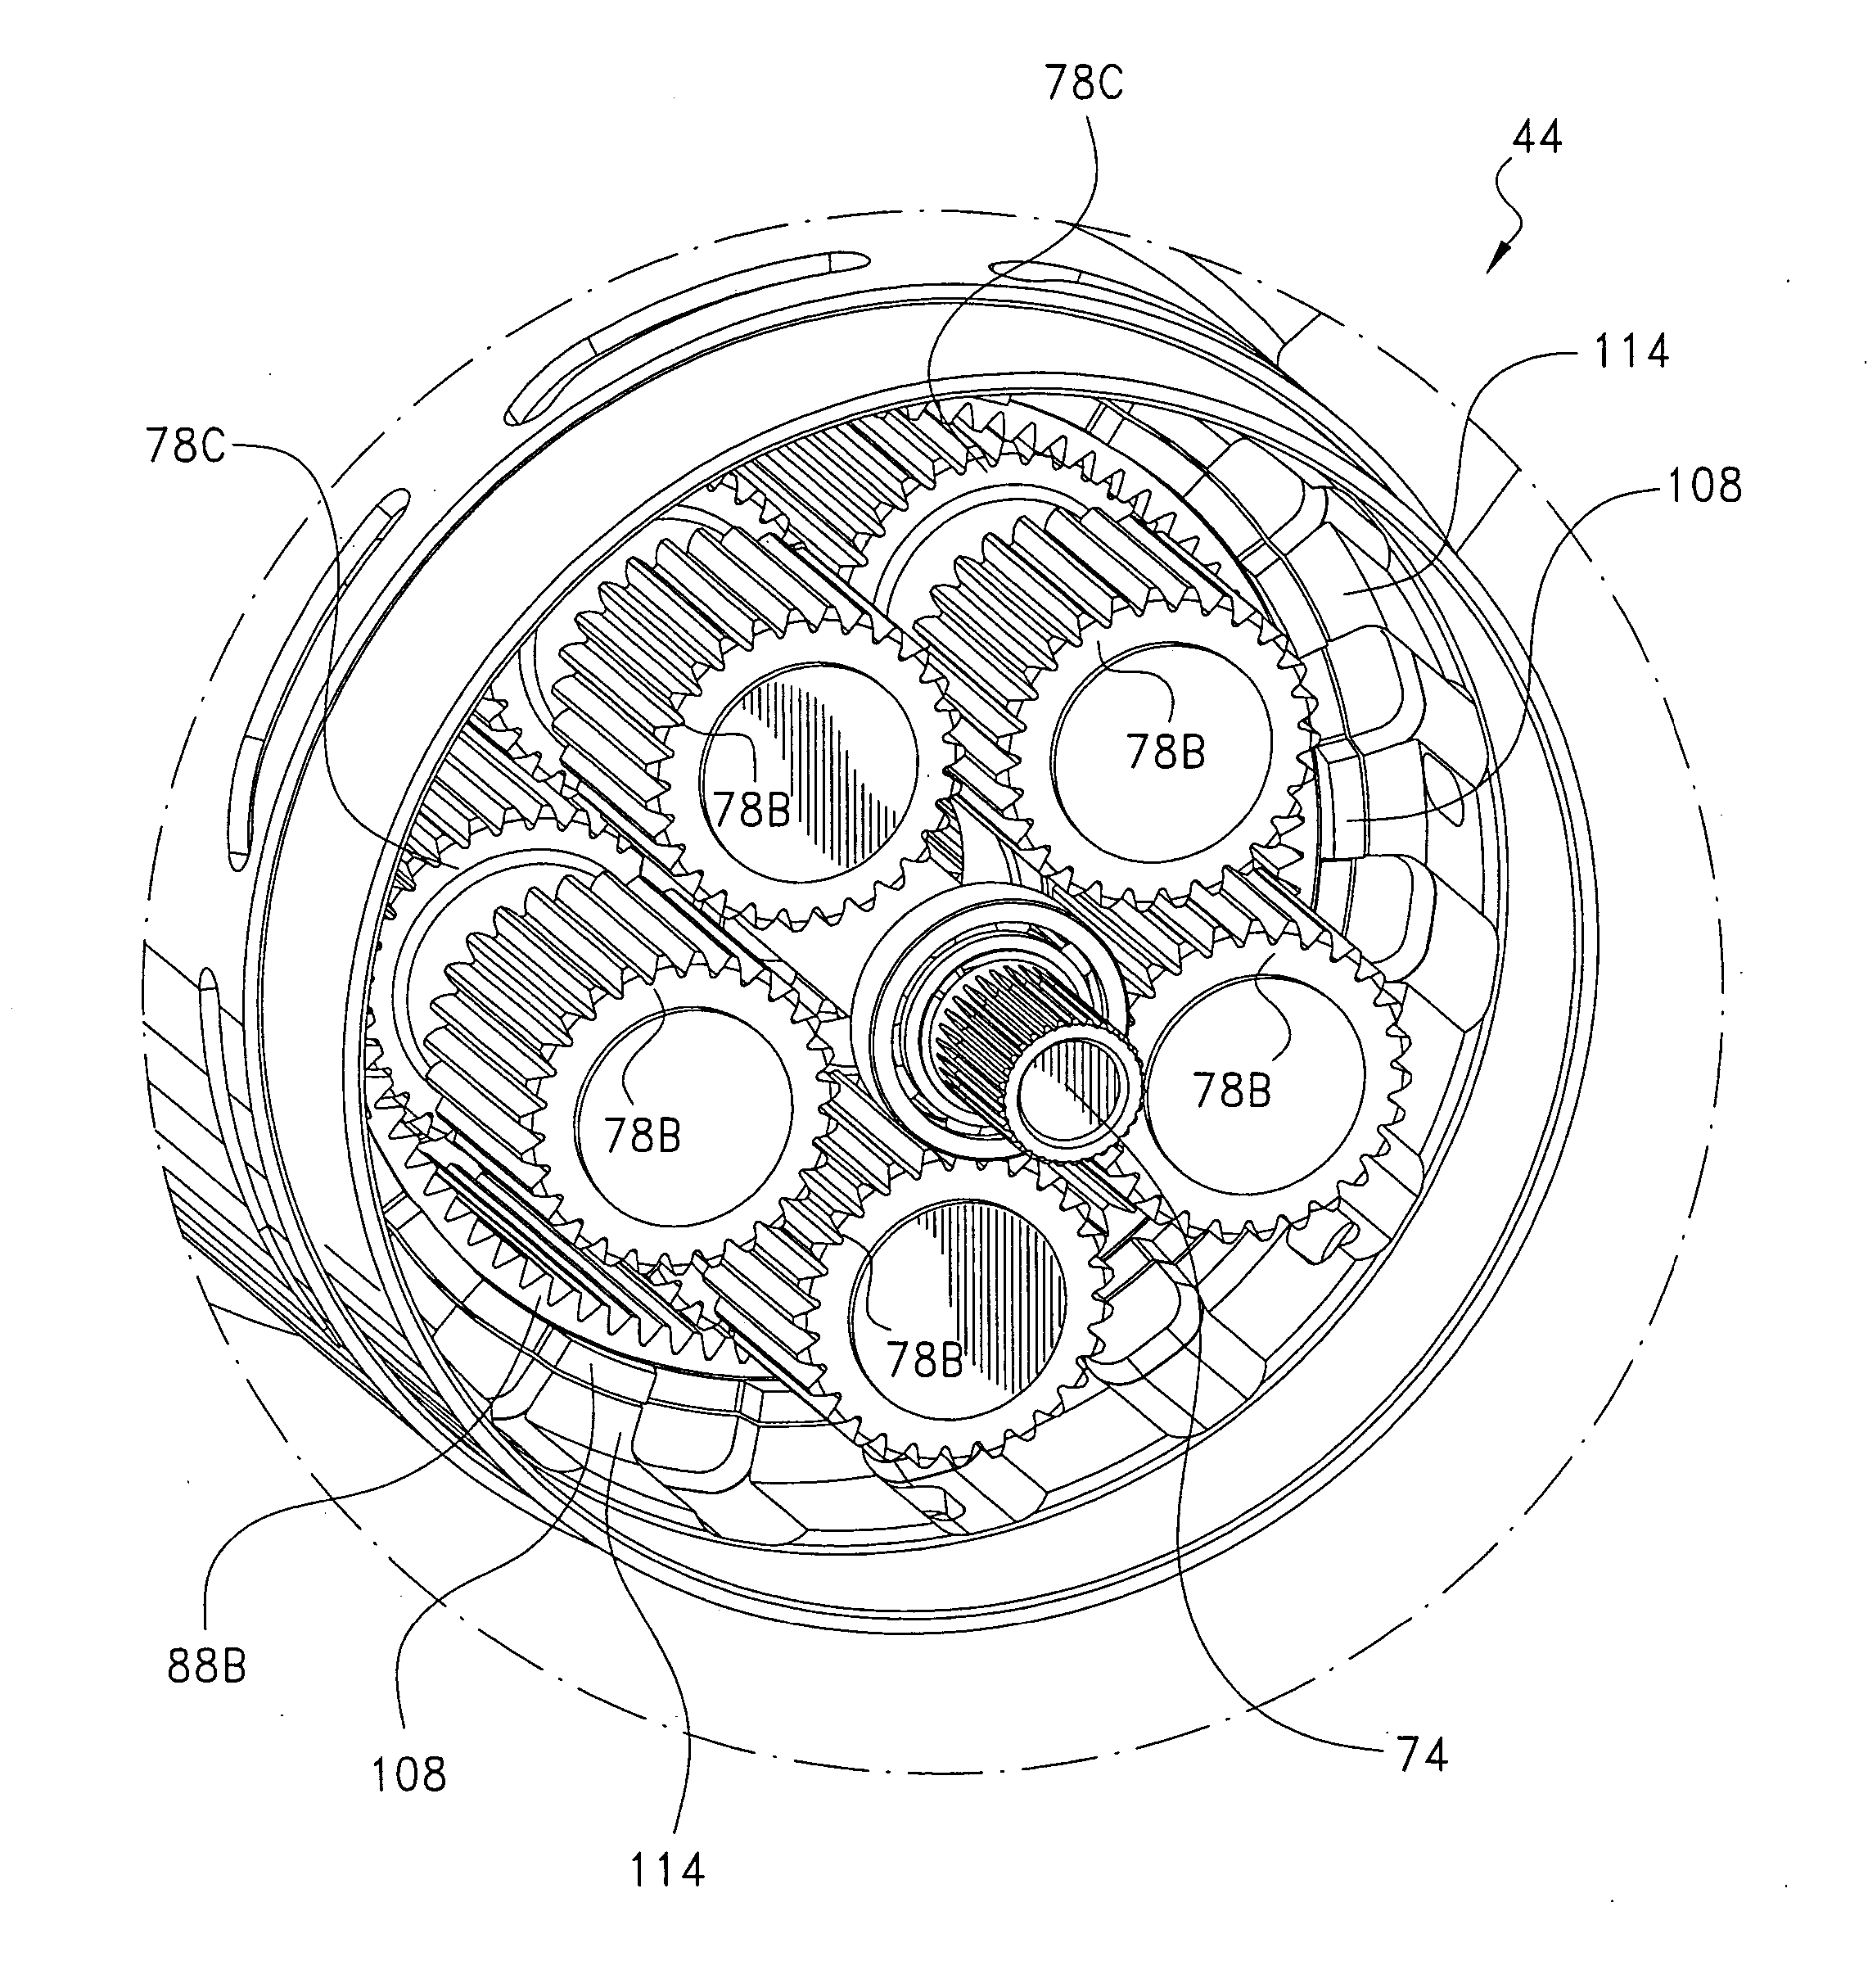 Jam tolerant electromechanical actuation systems and methods of operation